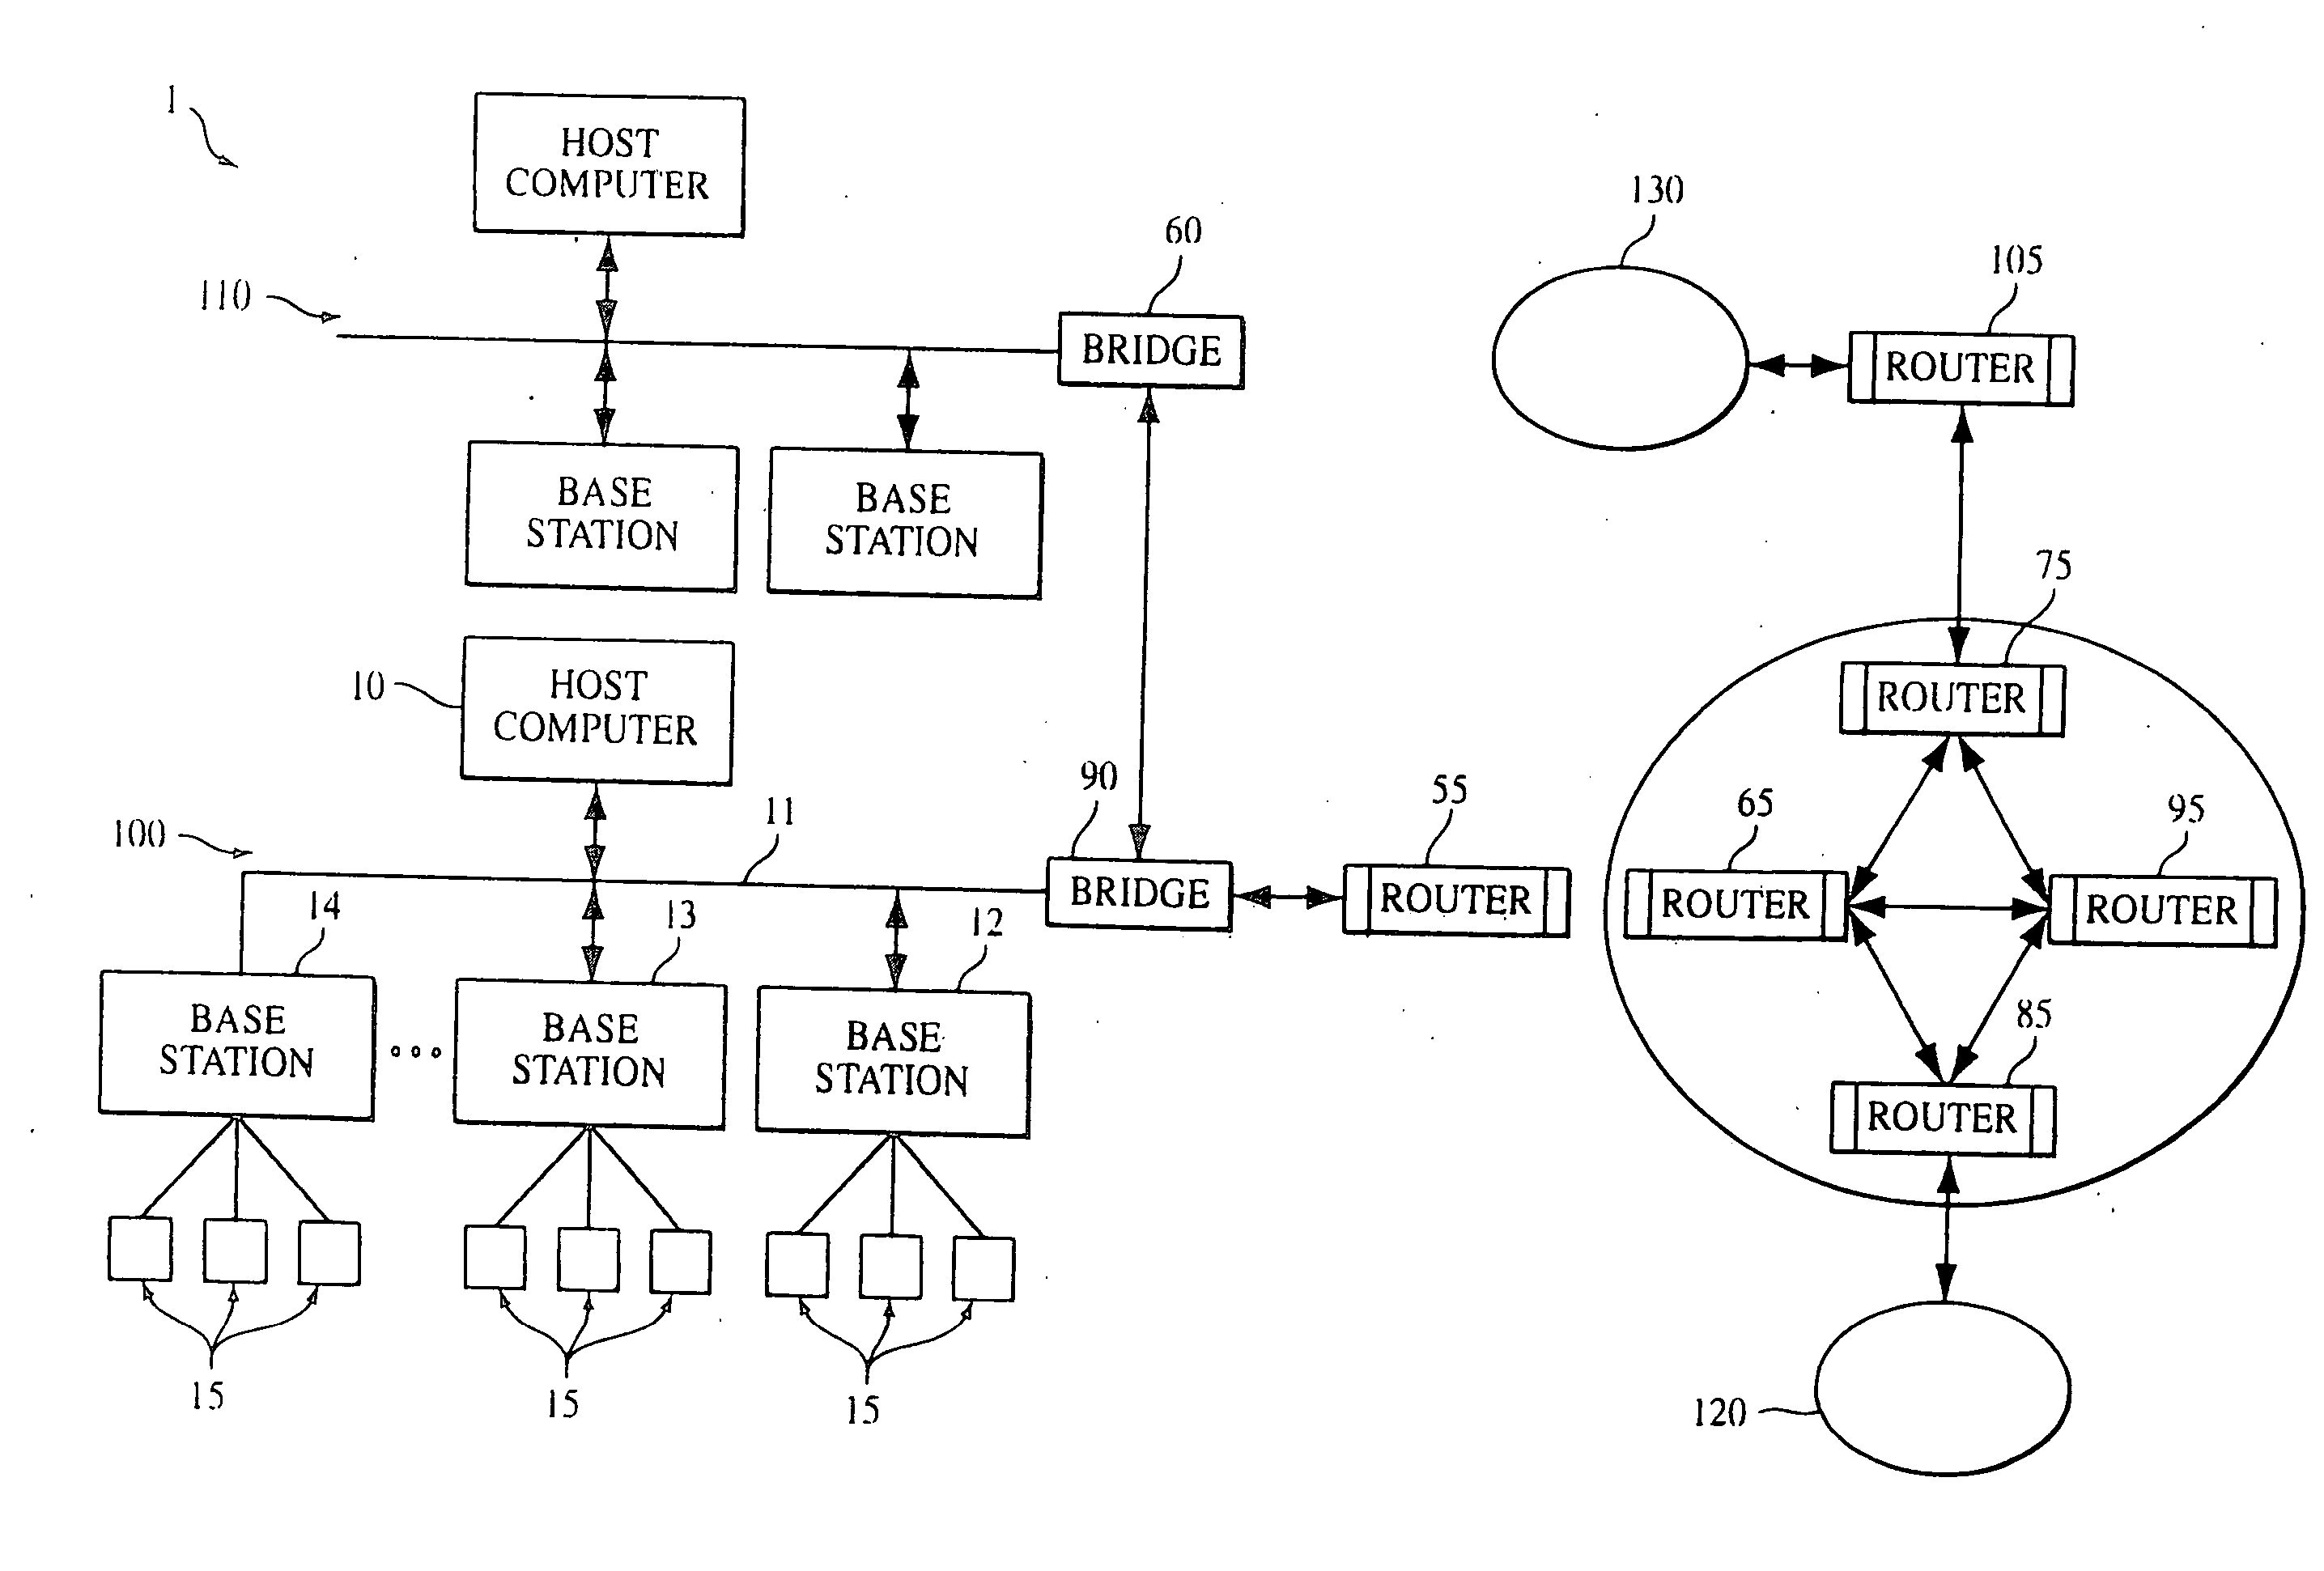 Auto configuration of portable computers for use in wireless local area networks